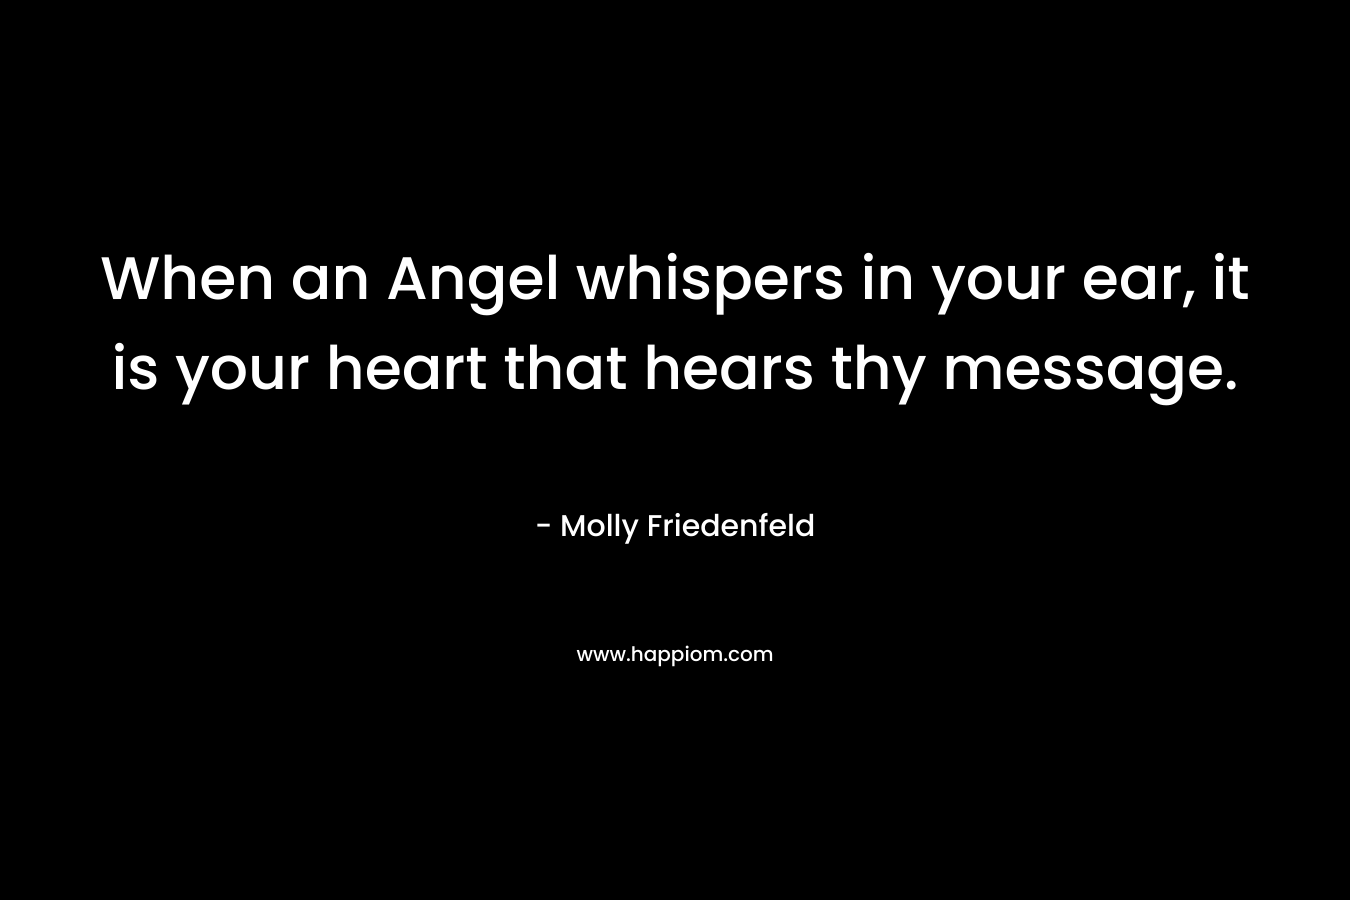 When an Angel whispers in your ear, it is your heart that hears thy message.